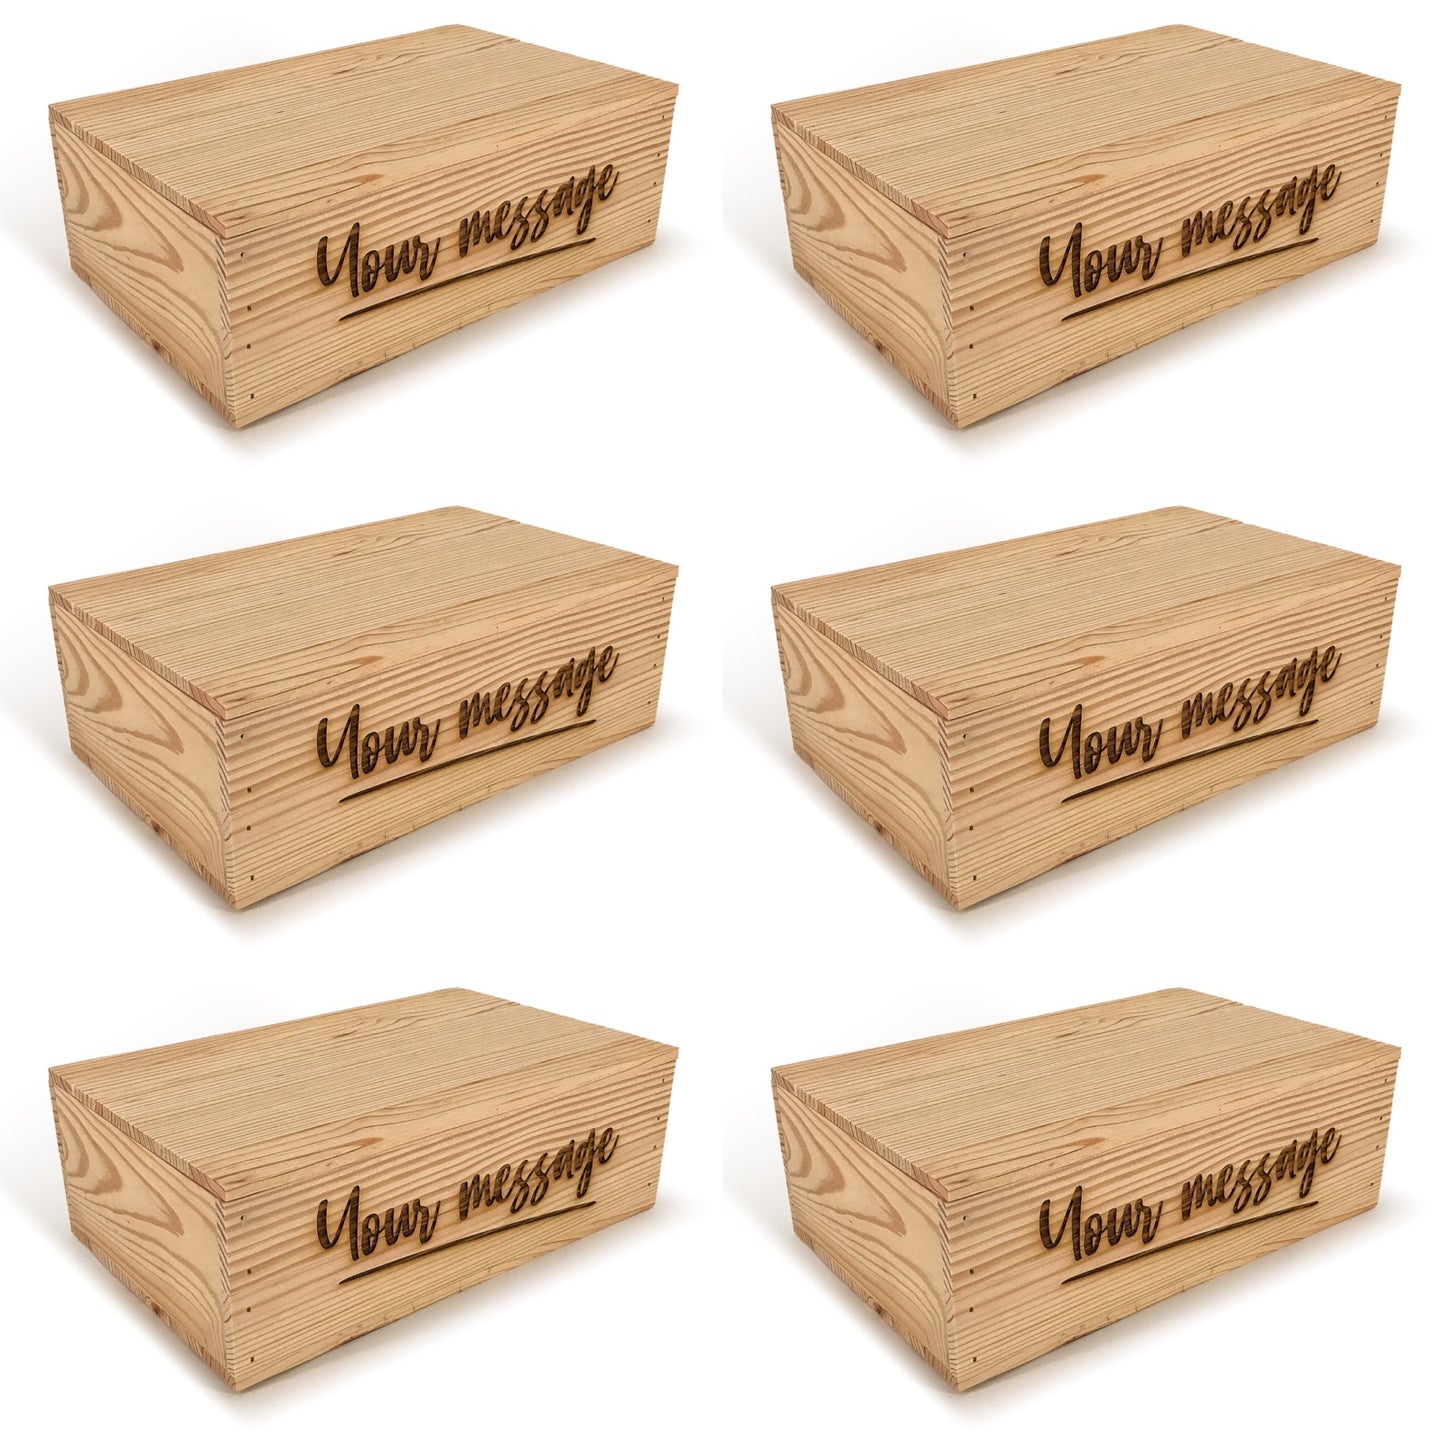 6 Two Bottle Wine Crate Boxes with Lid and Custom Message 14x9x4.5, 6-WB-14-9-4.5-ST-NW-LL,  12-WB-14-9-4.5-ST-NW-LL,  24-WB-14-9-4.5-ST-NW-LL,  48-WB-14-9-4.5-ST-NW-LL,  96-WB-14-9-4.5-ST-NW-LL